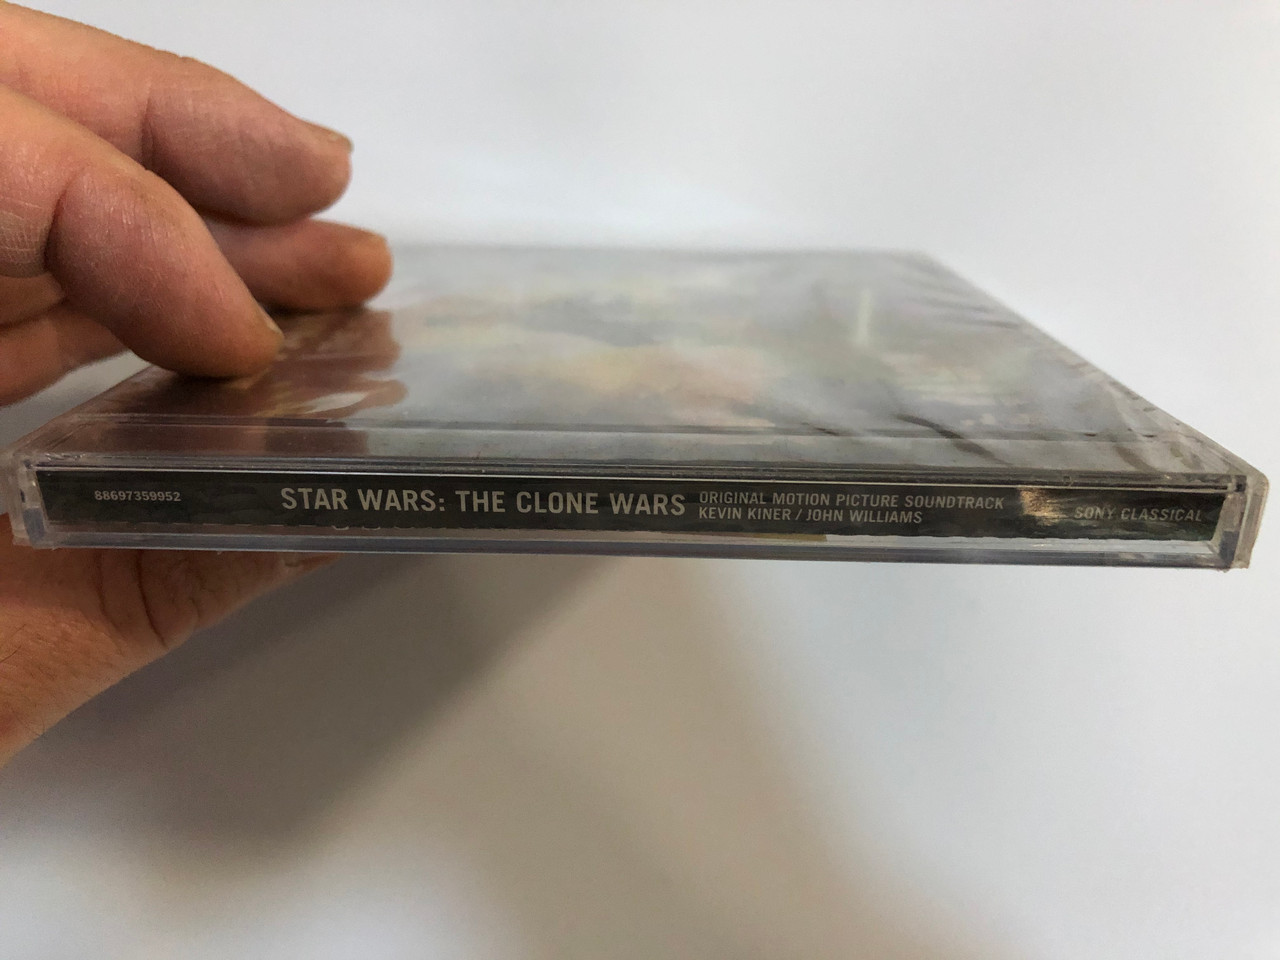 Star Wars: The Clone Wars (Original Motion Picture Soundtrack) / Music  Composed And Conducted By Kevin Kiner / Original Star Wars Themes And Score  by